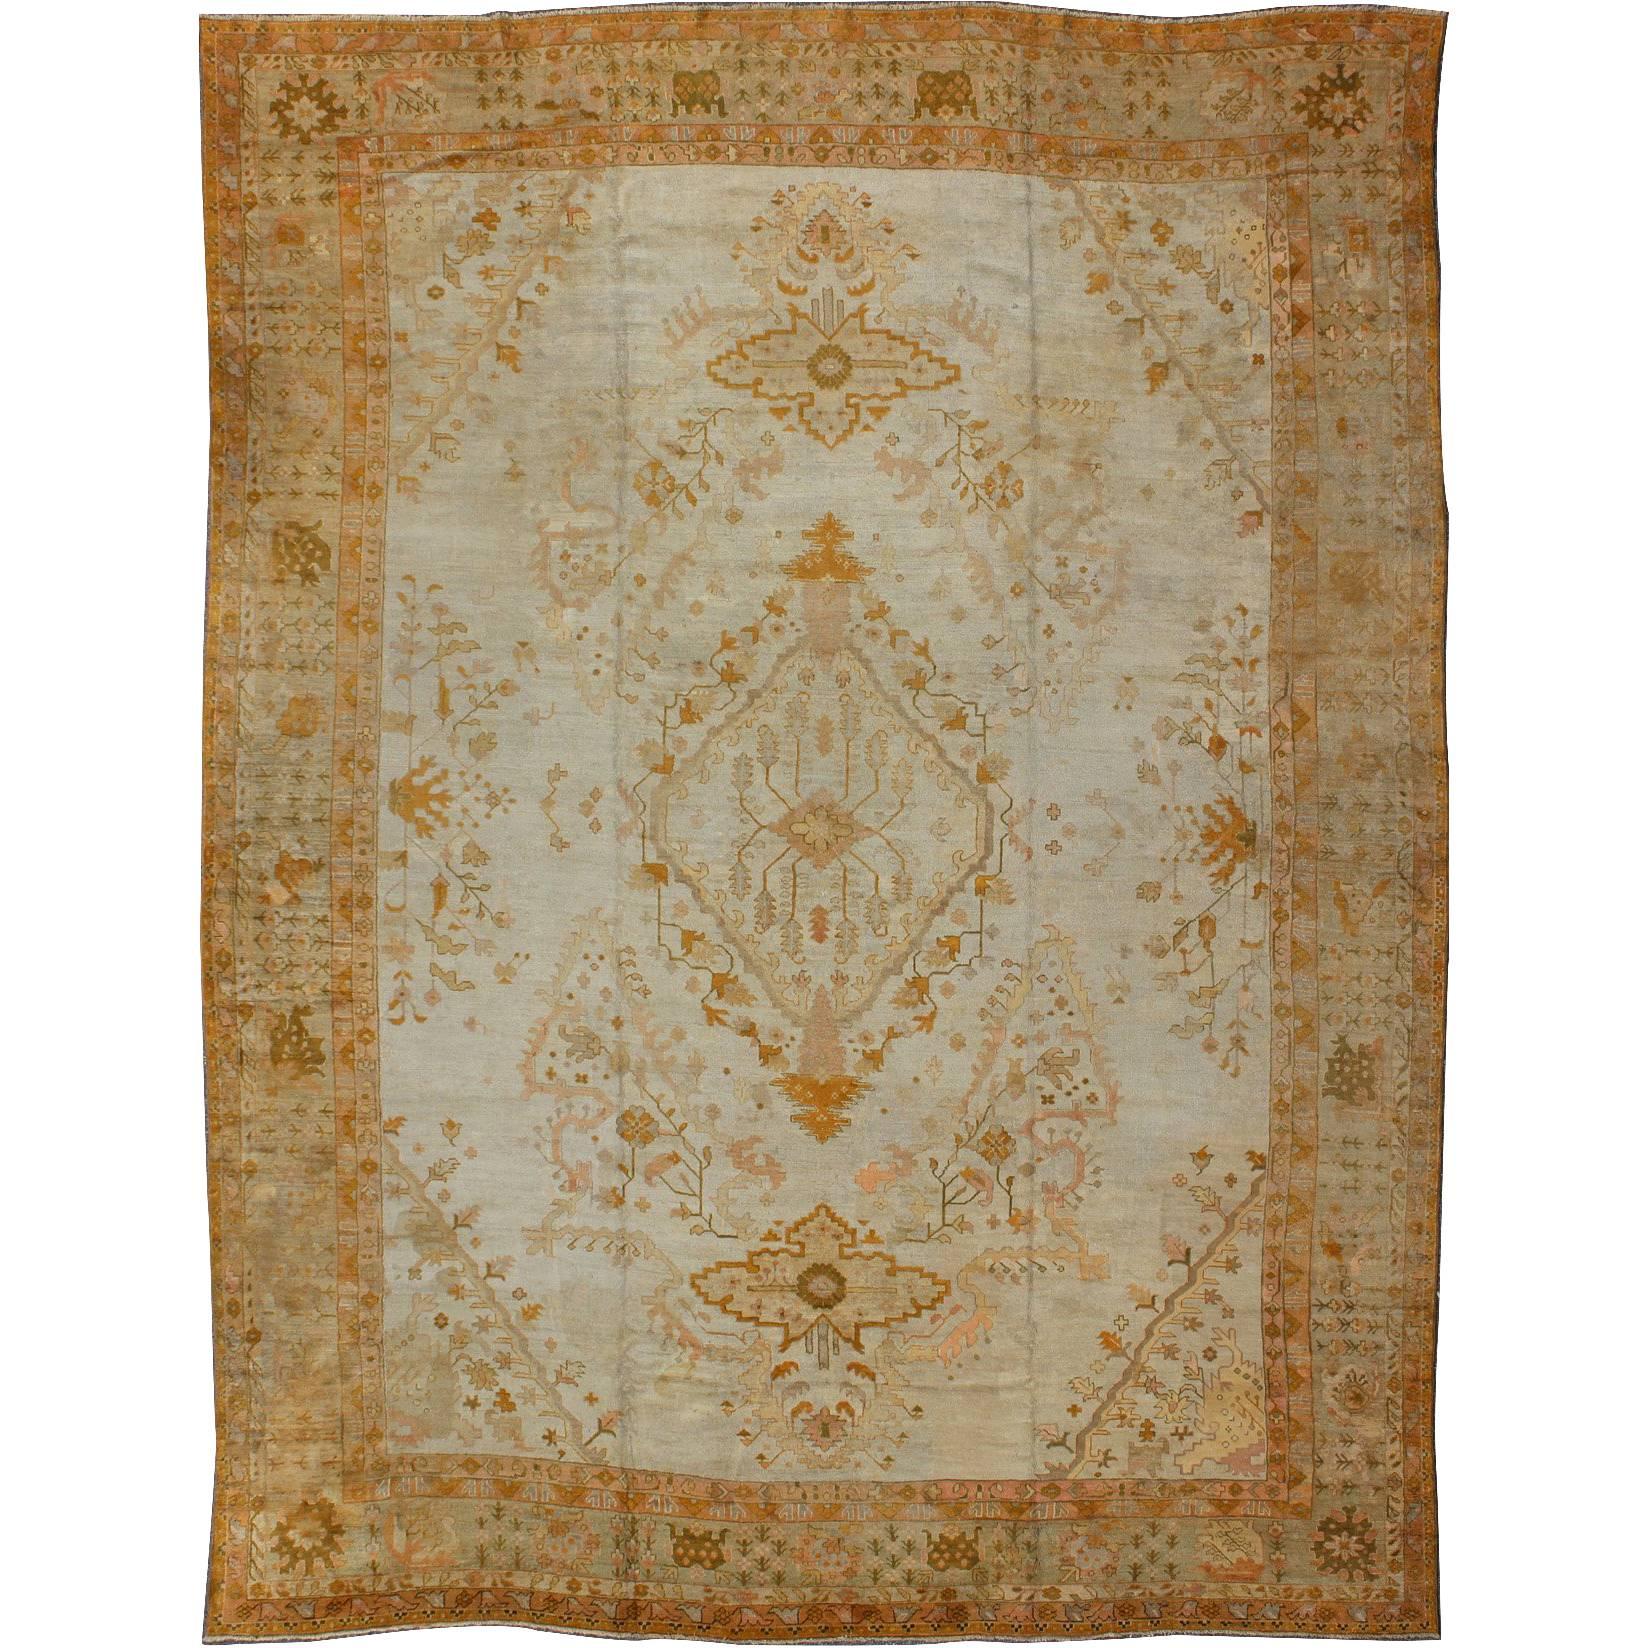 Very Large Antique Turkish Oushak Carpet in Cream, Gold, Green, Orange and Ivory For Sale